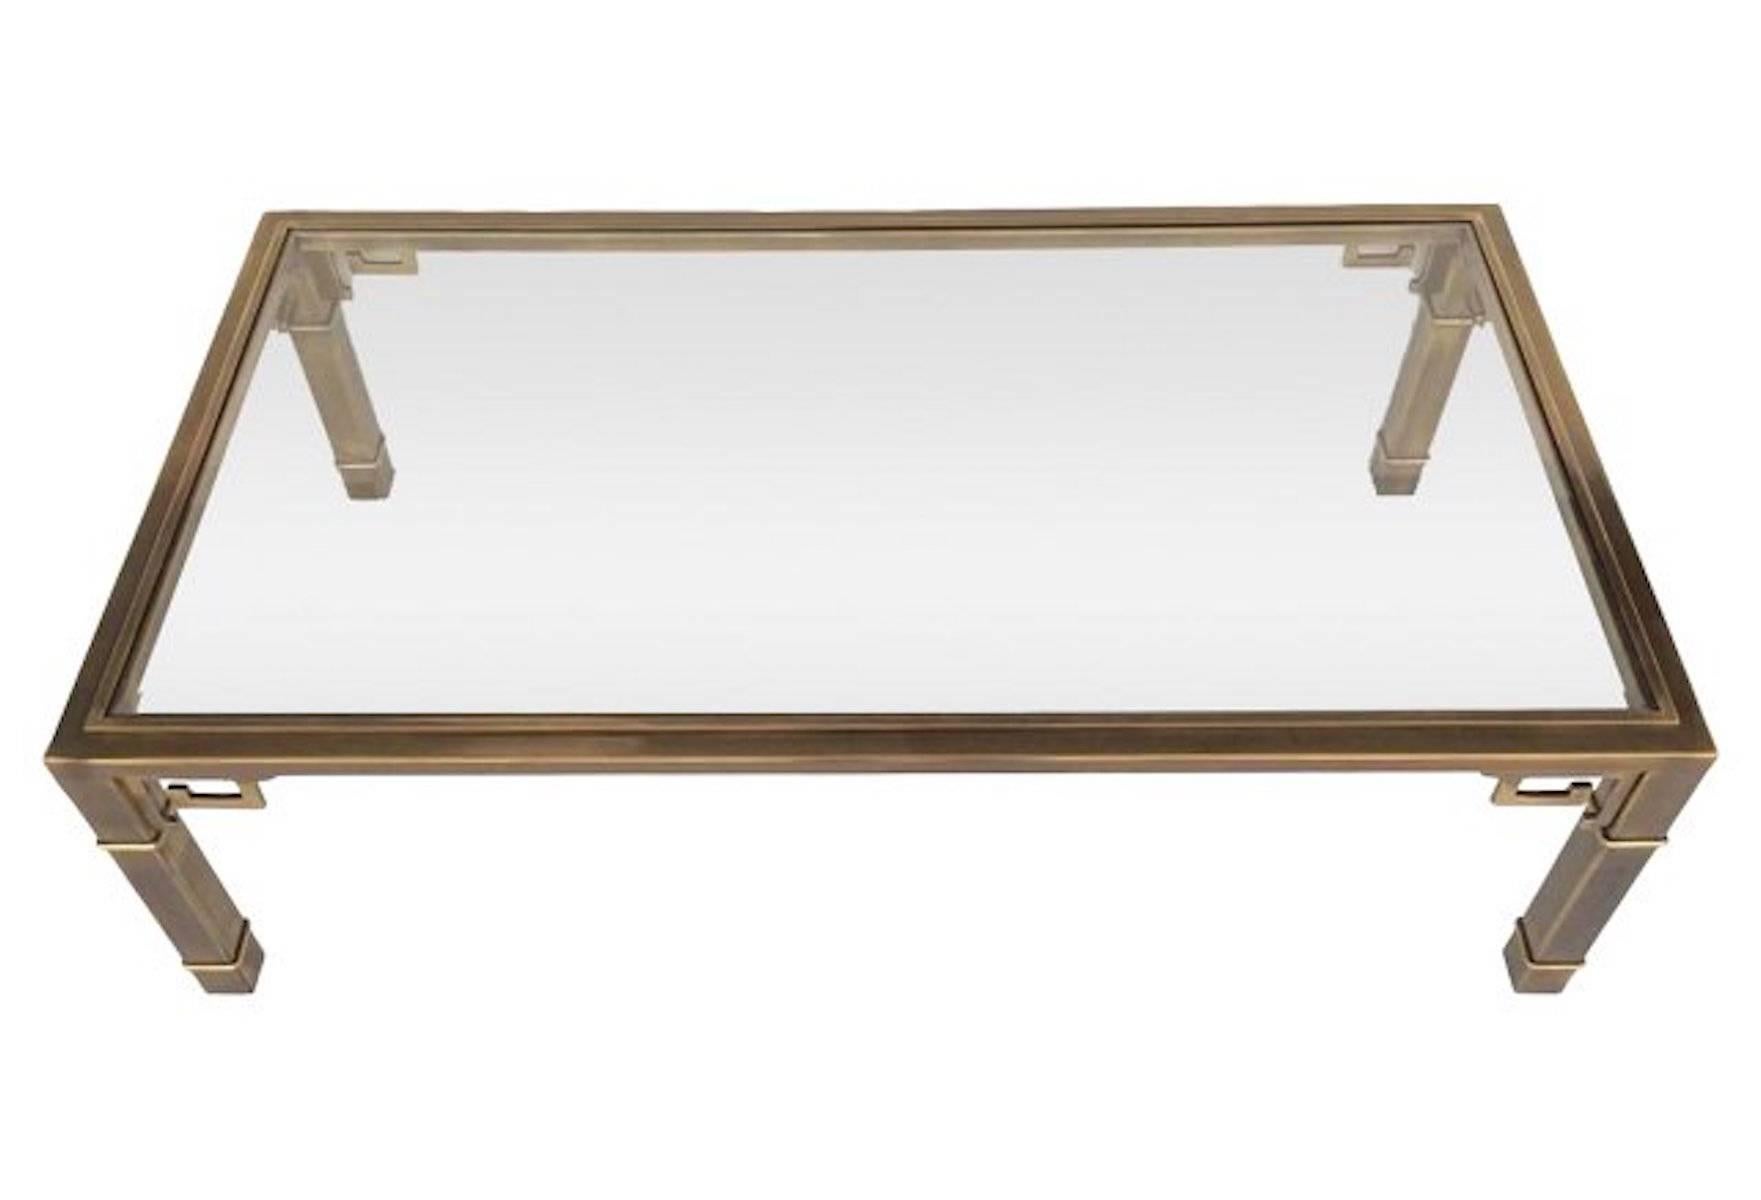 1970s Greek-key brass and glass cocktail table by Mastercraft. Original beveled glass top. Light wear to original glass.